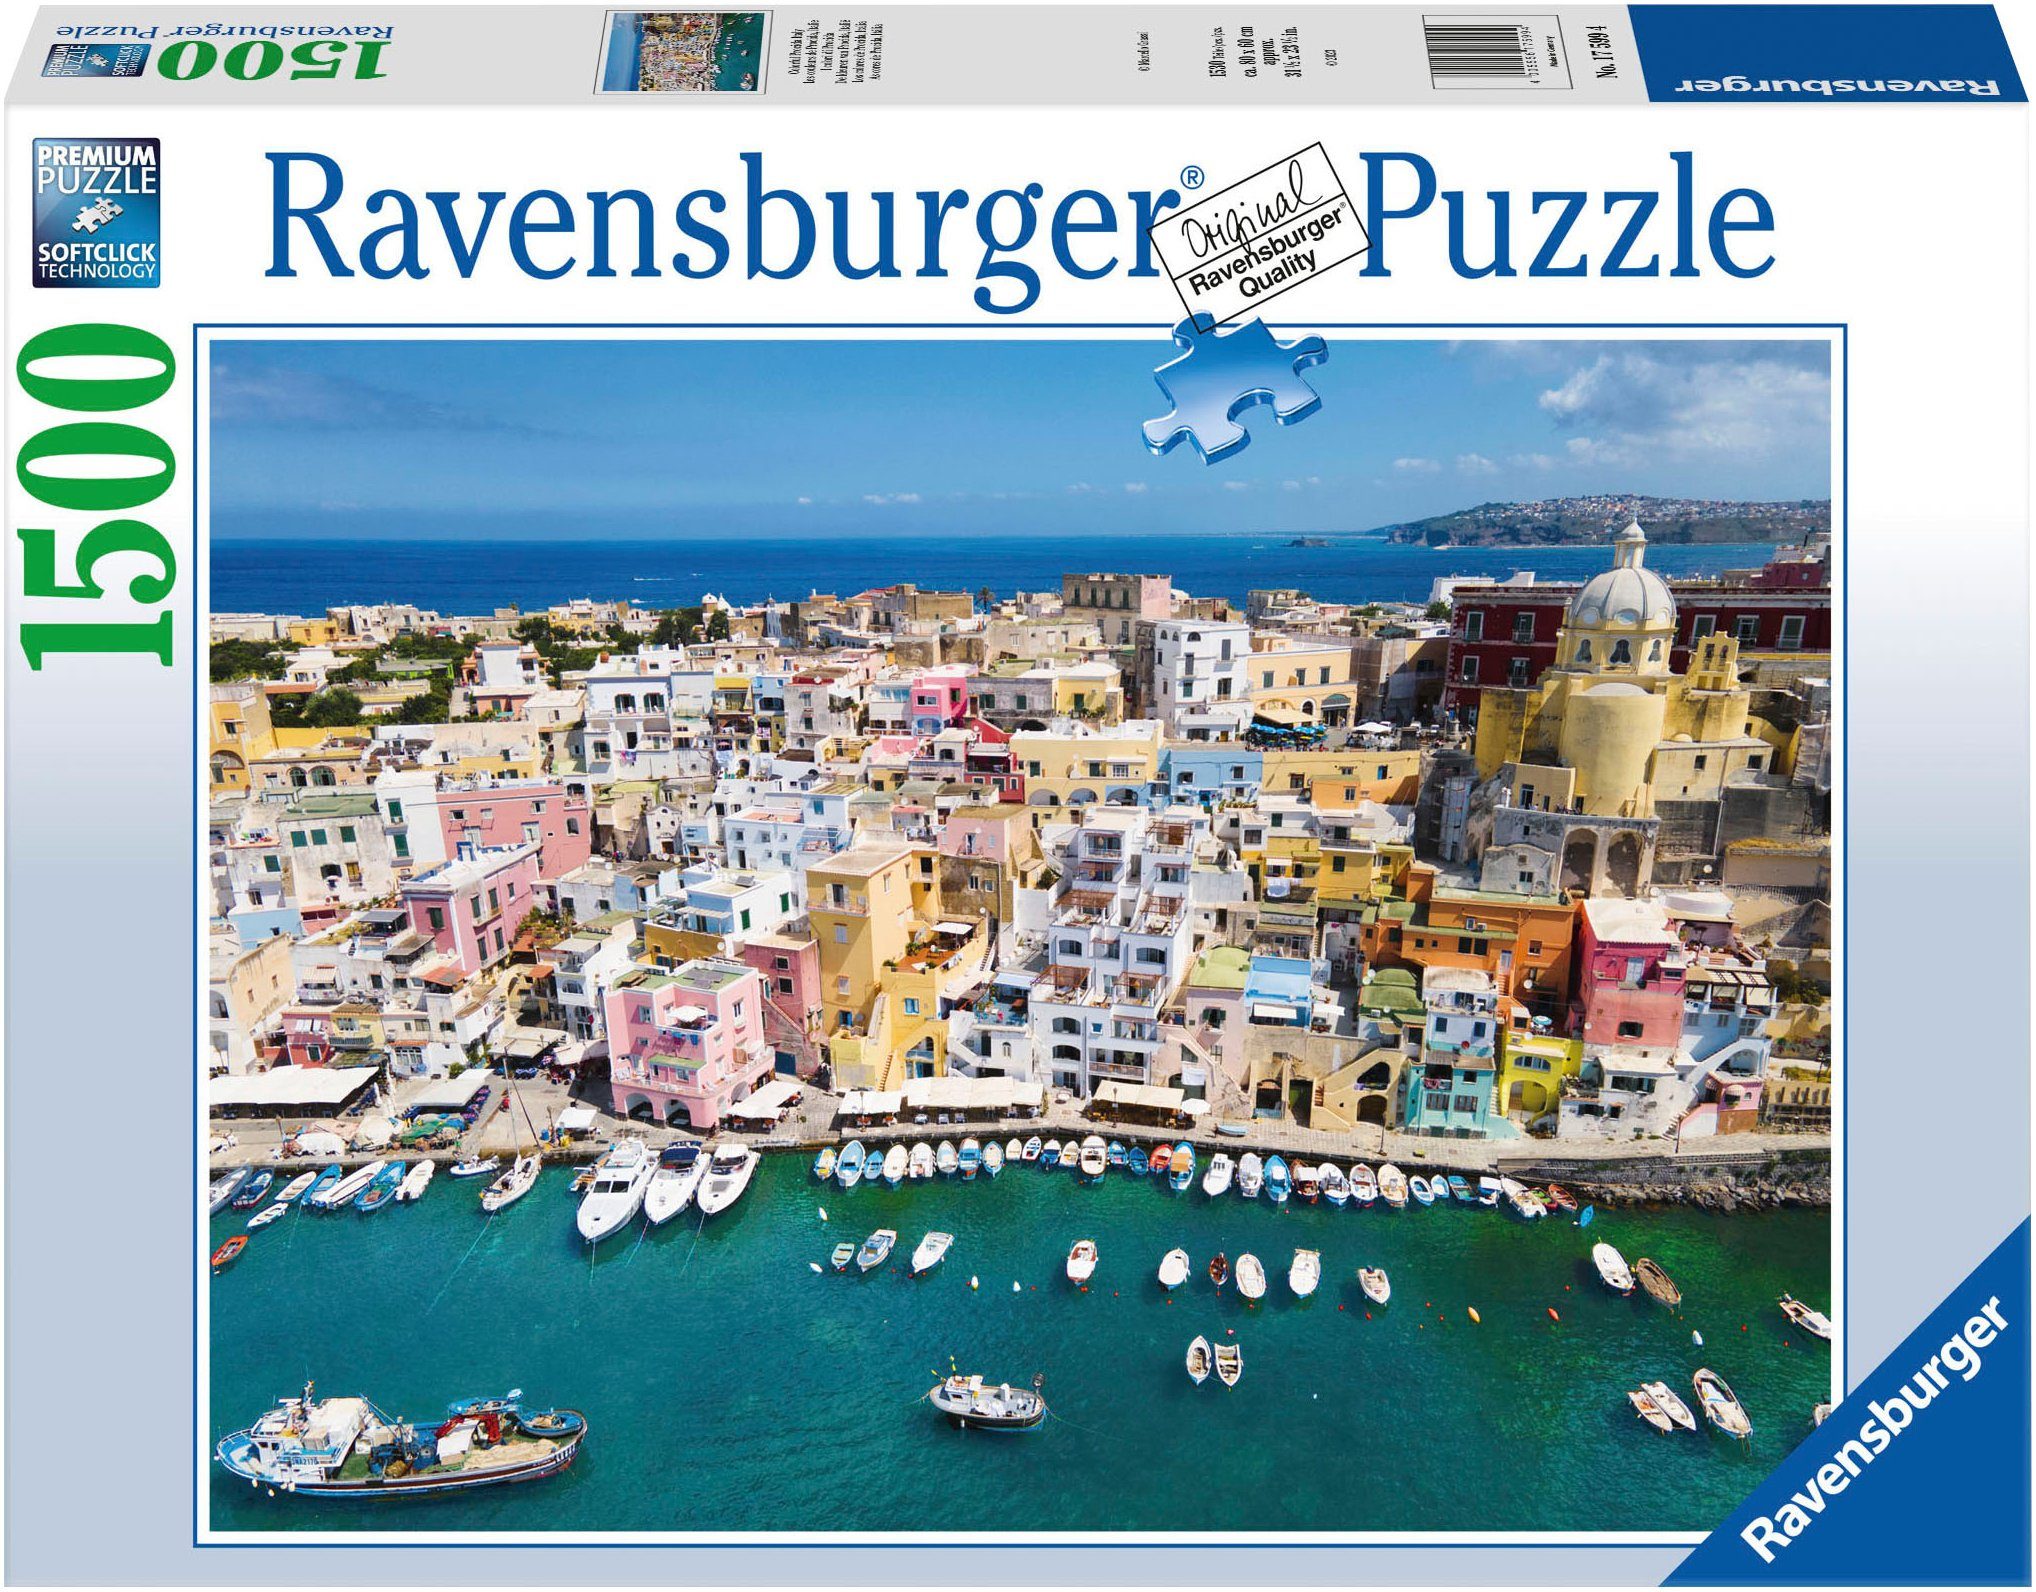 Ravensburger Puzzle Colorful Procida Italy, 1500 Puzzleteile, Made in Germany, FSC® - schützt Wald - weltweit